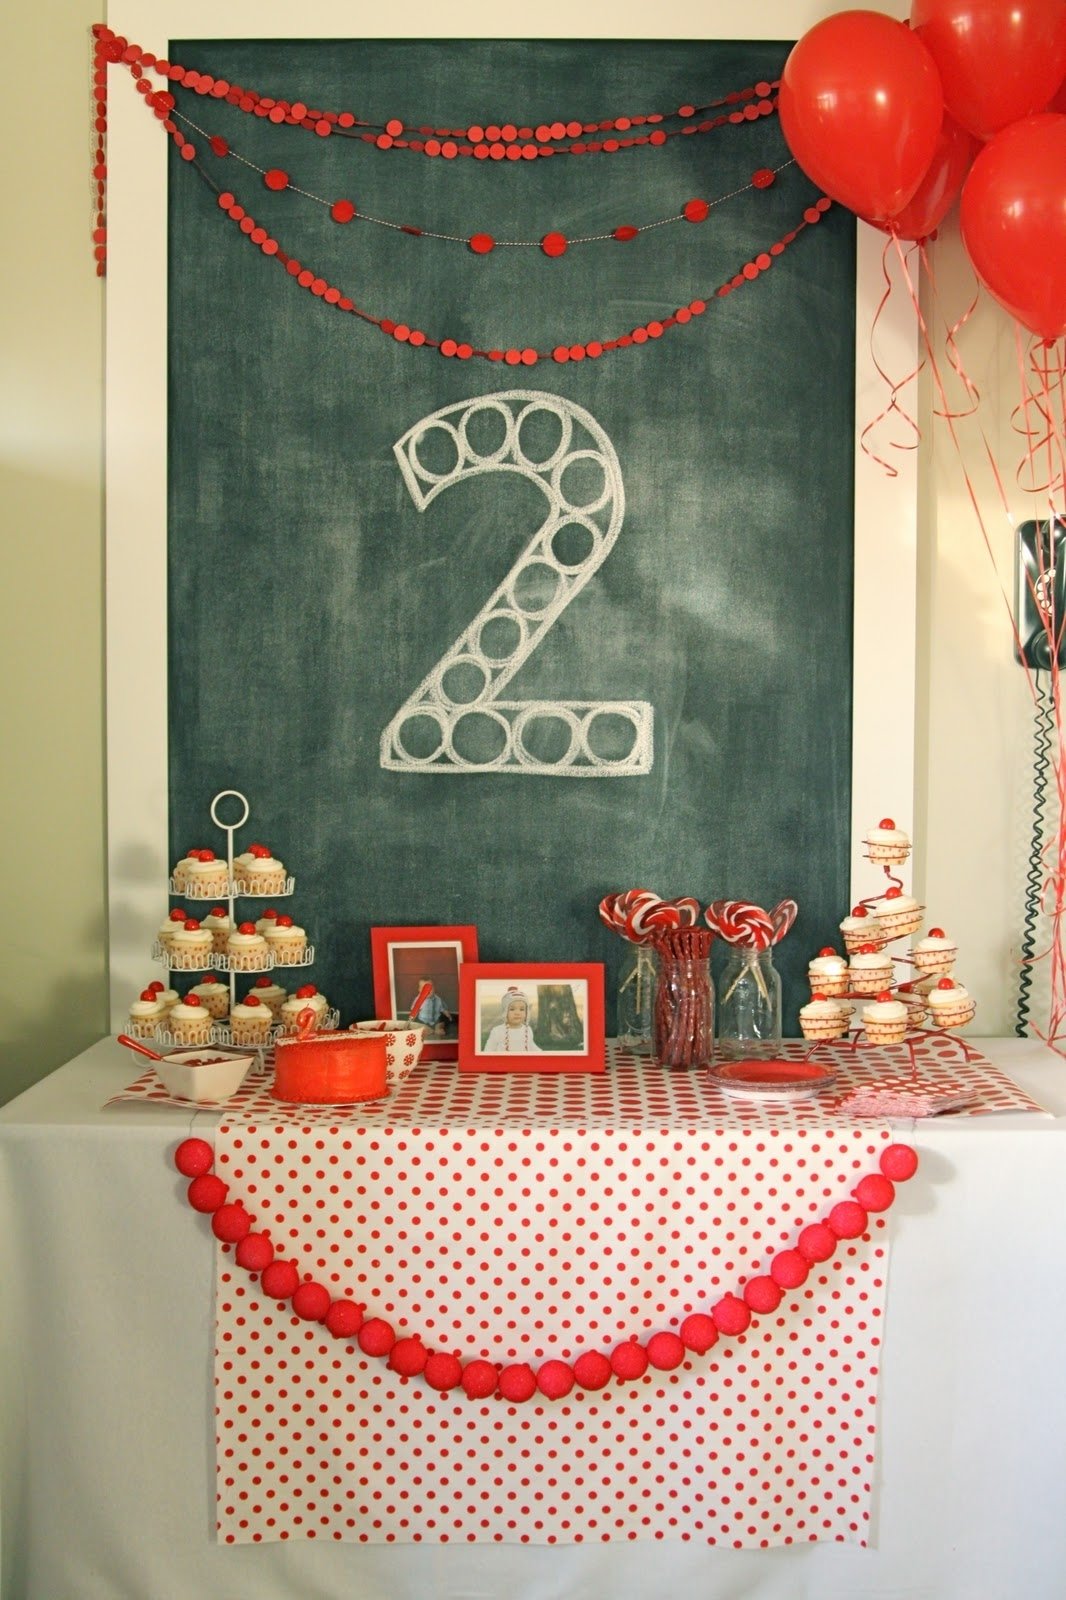 10 Awesome Two Year Old Birthday Ideas red ball party levis second birthday the macs 2 2022